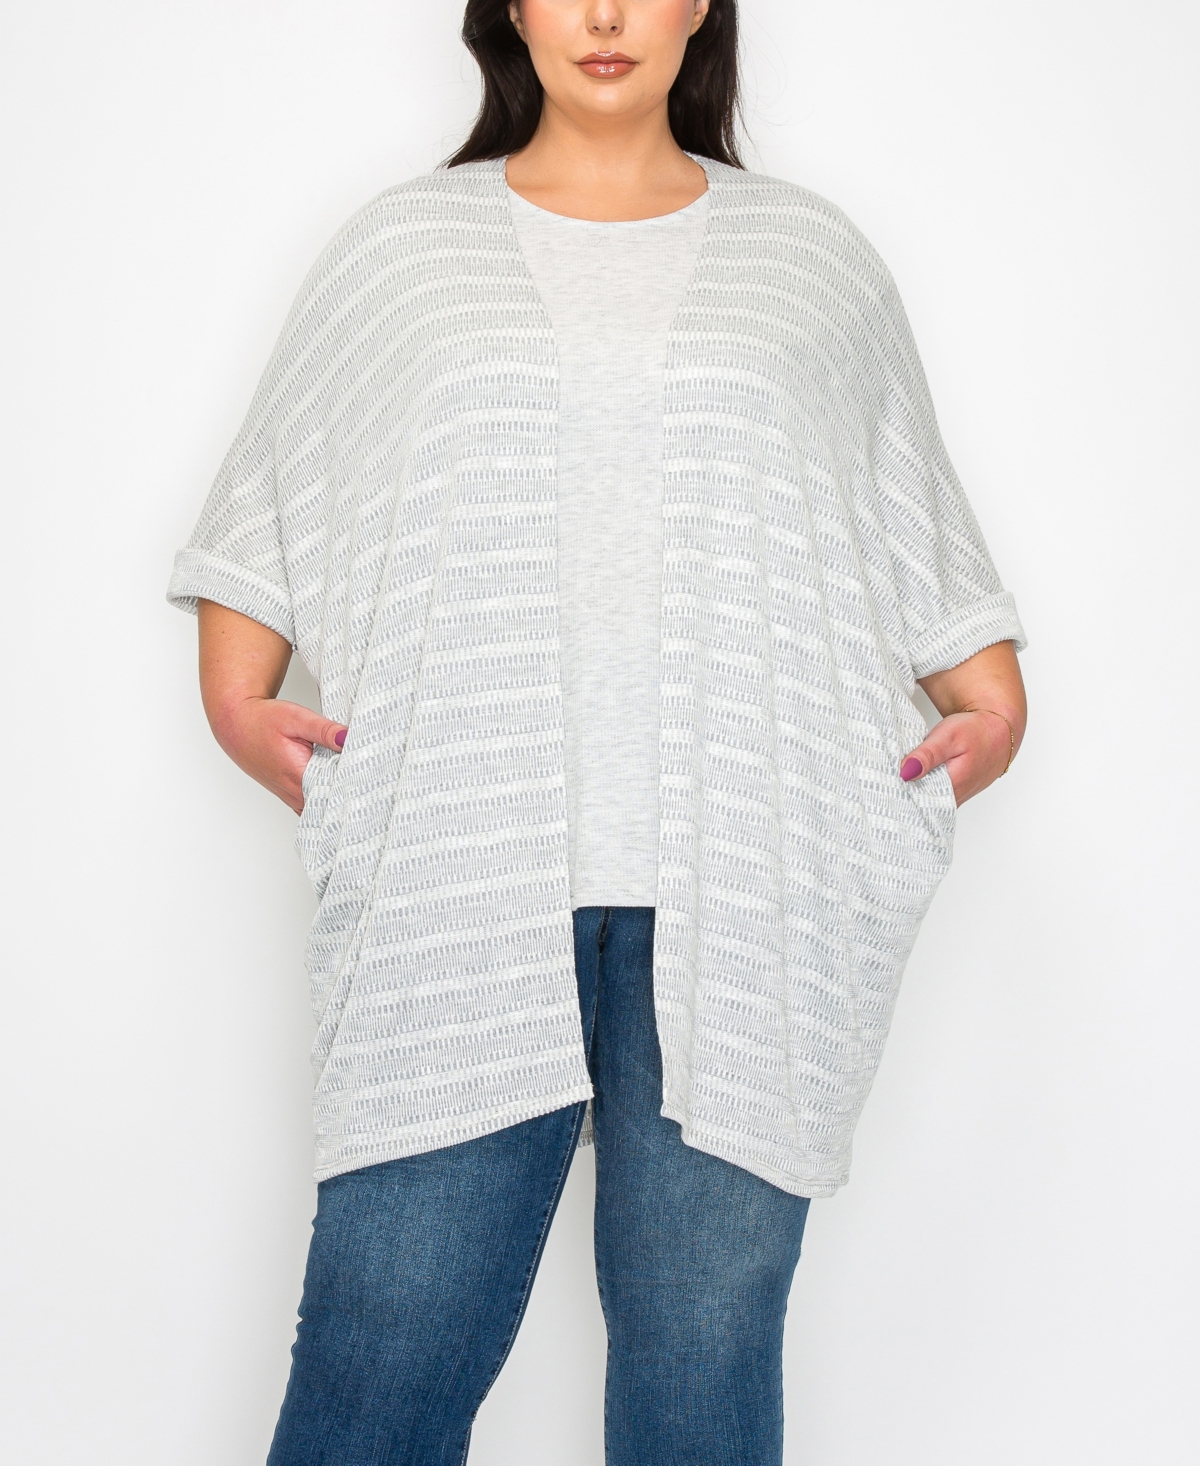 Coin 1804 Plus Size Textured Jacquard Stripe Rolled Sleeve Pocket Kimono Top In Gray Ivory